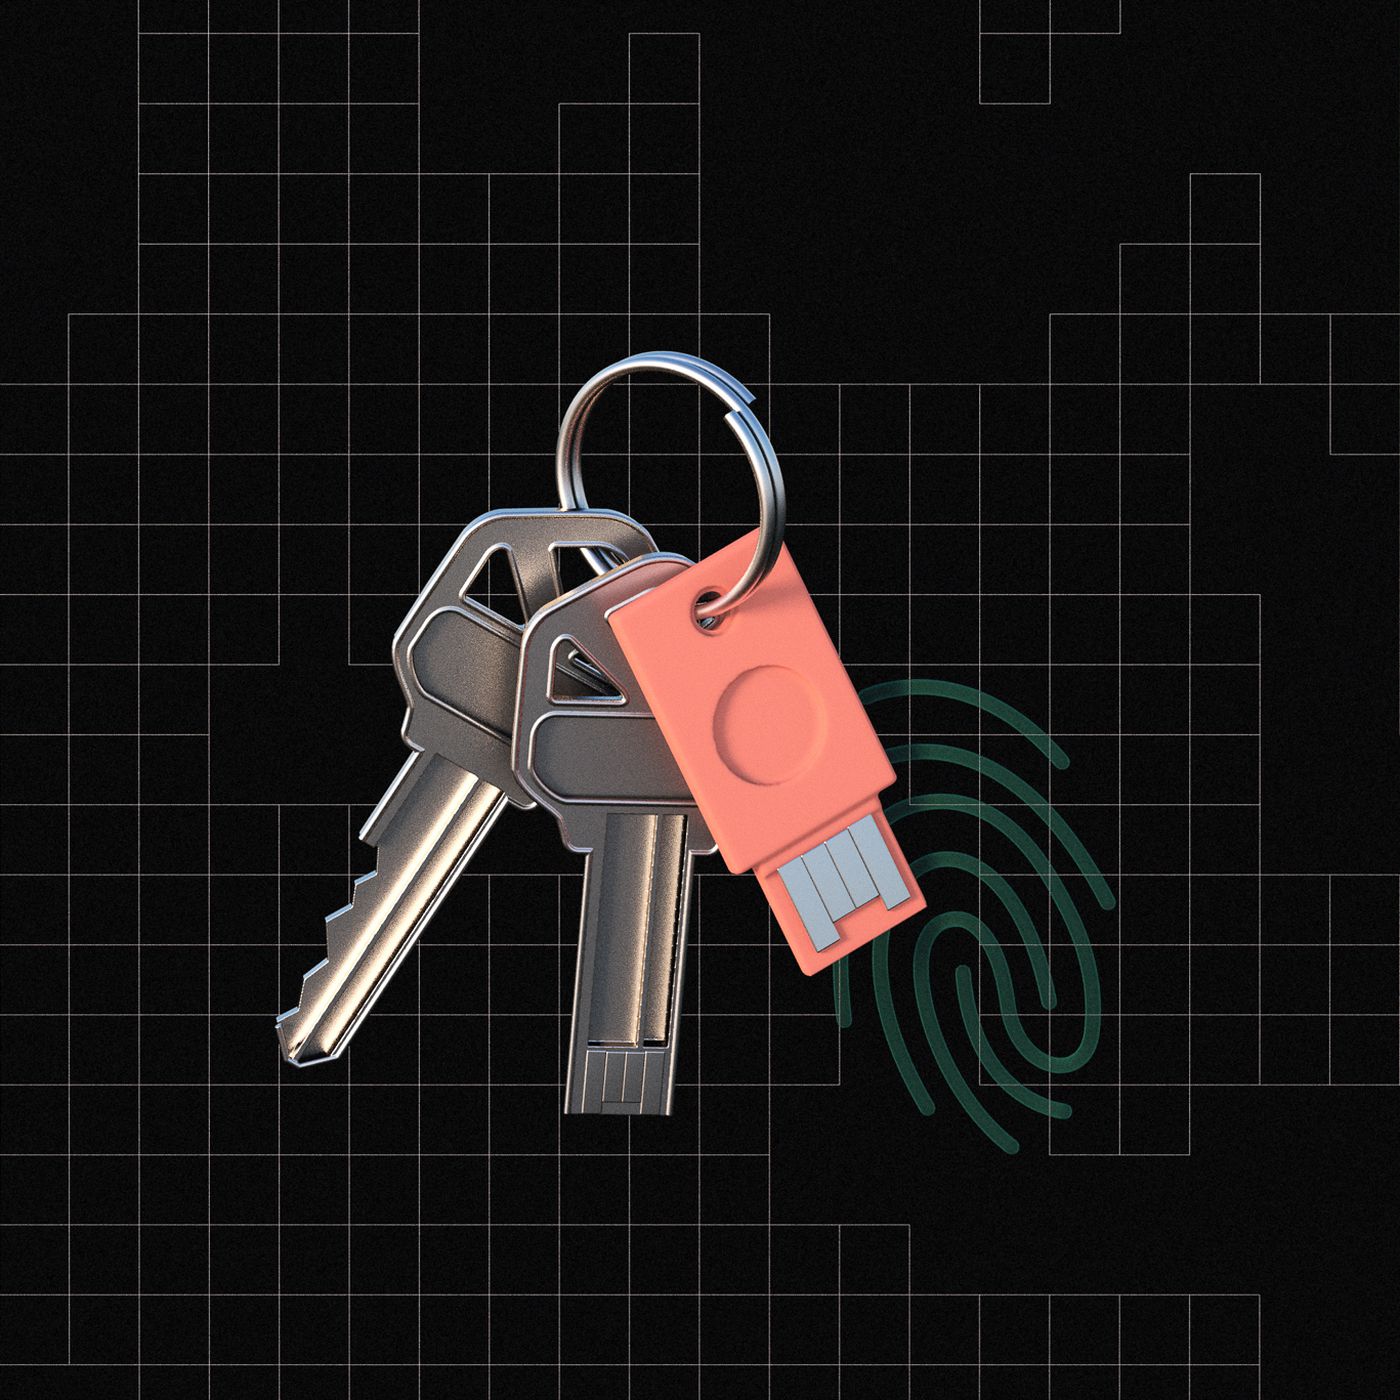 How to use a two-factor security key - The Verge